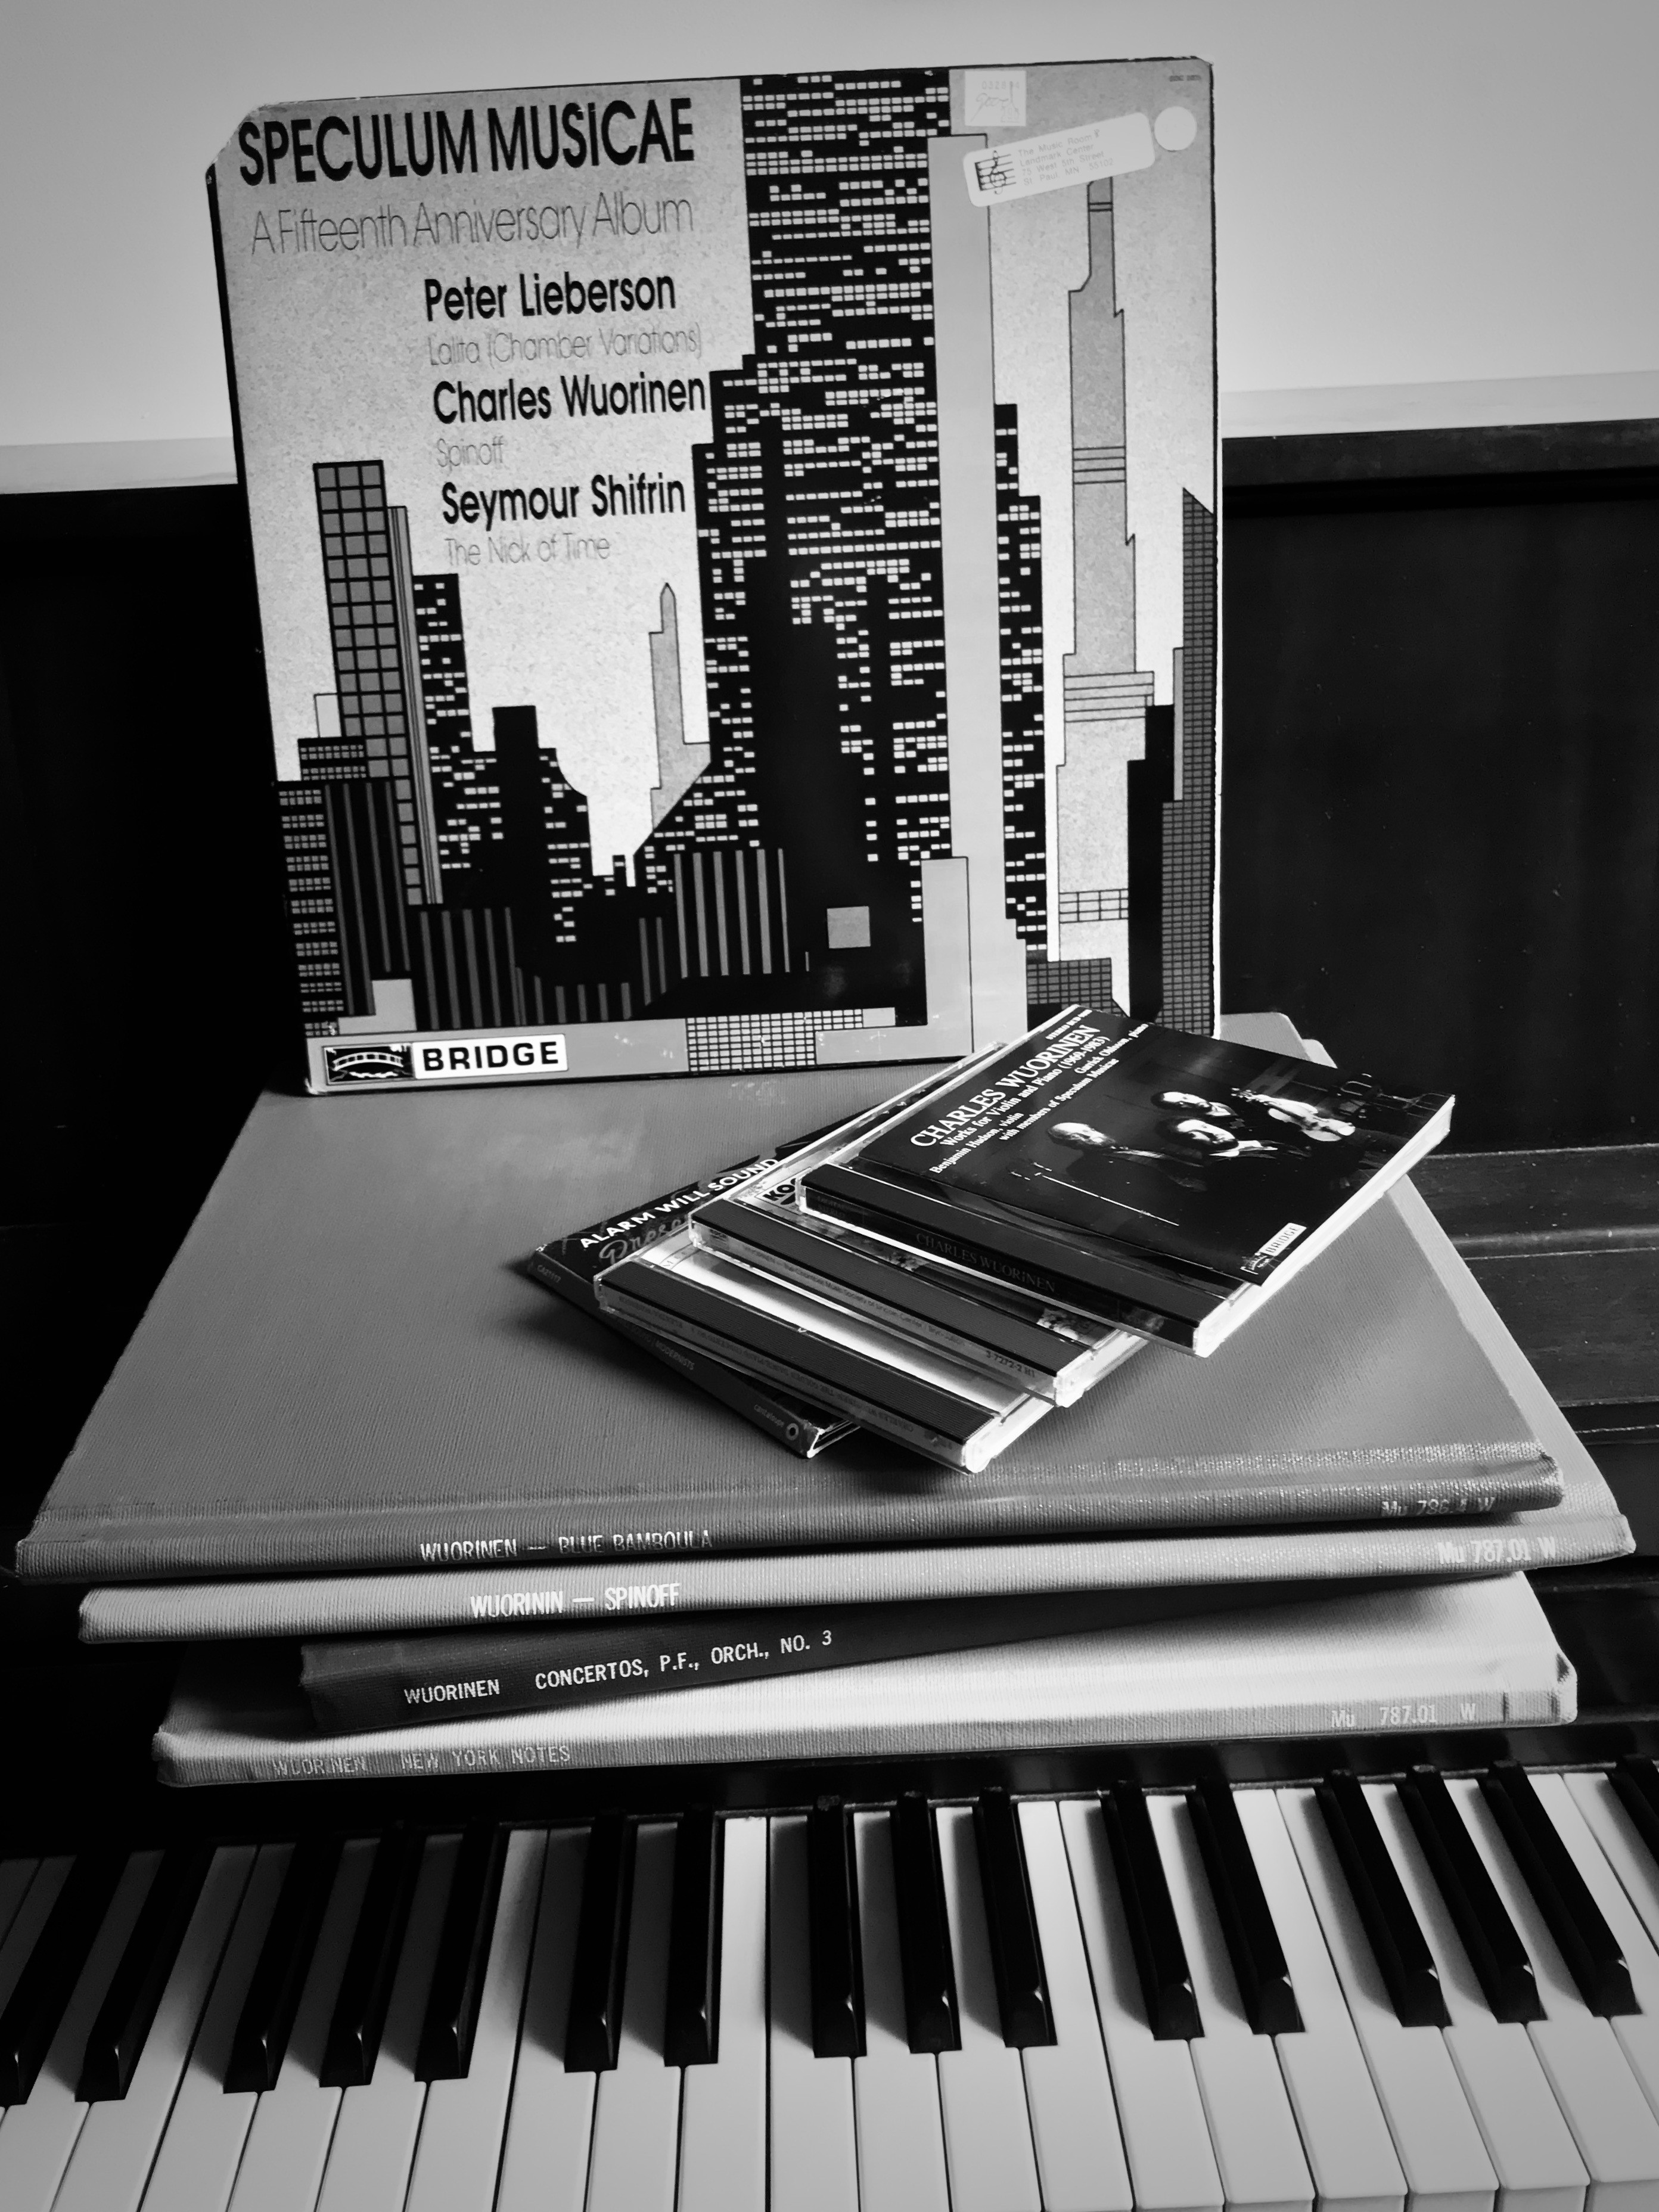 A collection of Wuorinen LPs and CDs on top of a digital keyboard.